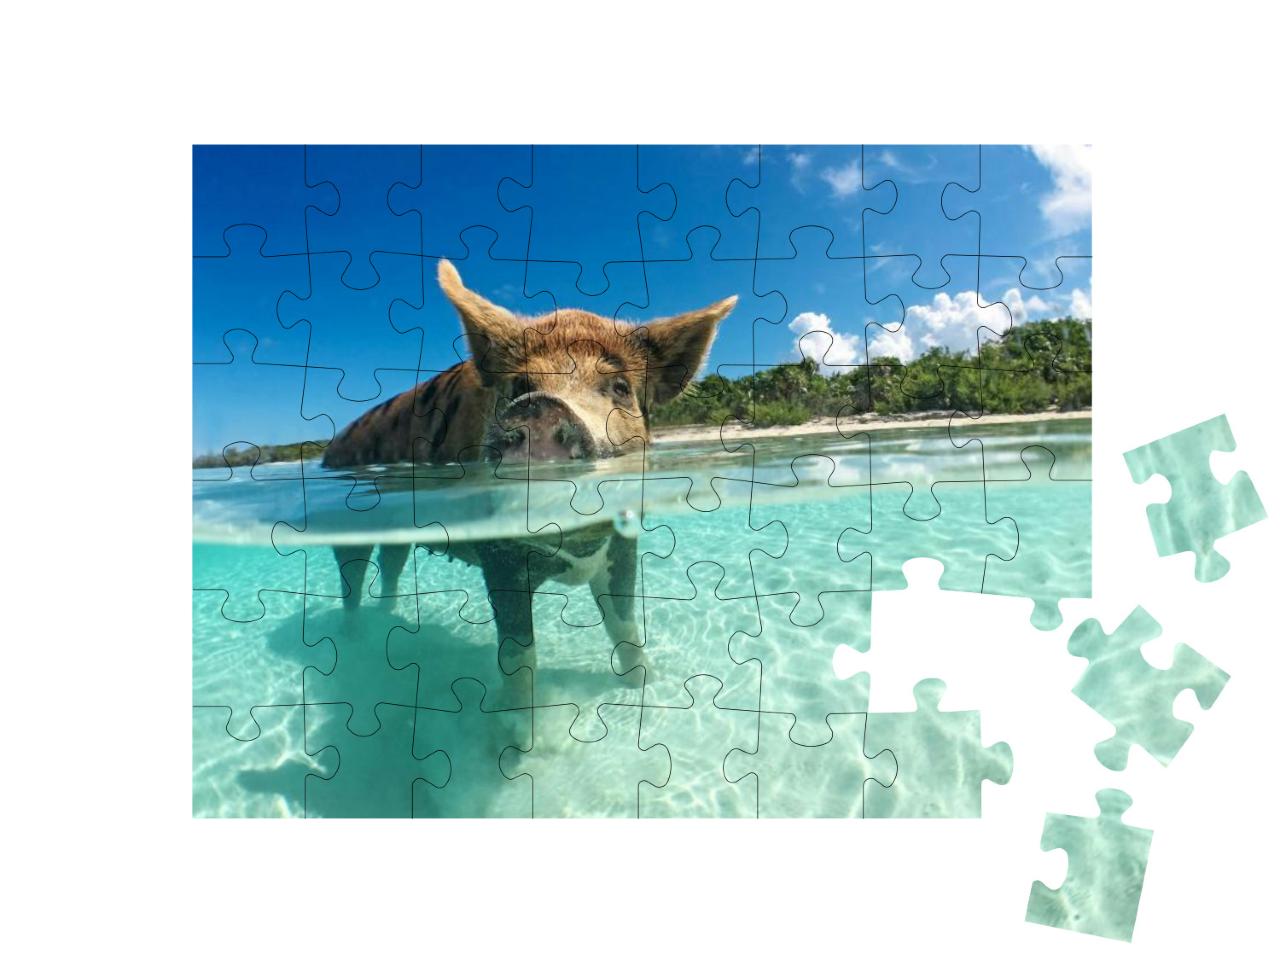 Wild, Swimming Pig on Big Majors Cay in the Bahamas... Jigsaw Puzzle with 48 pieces